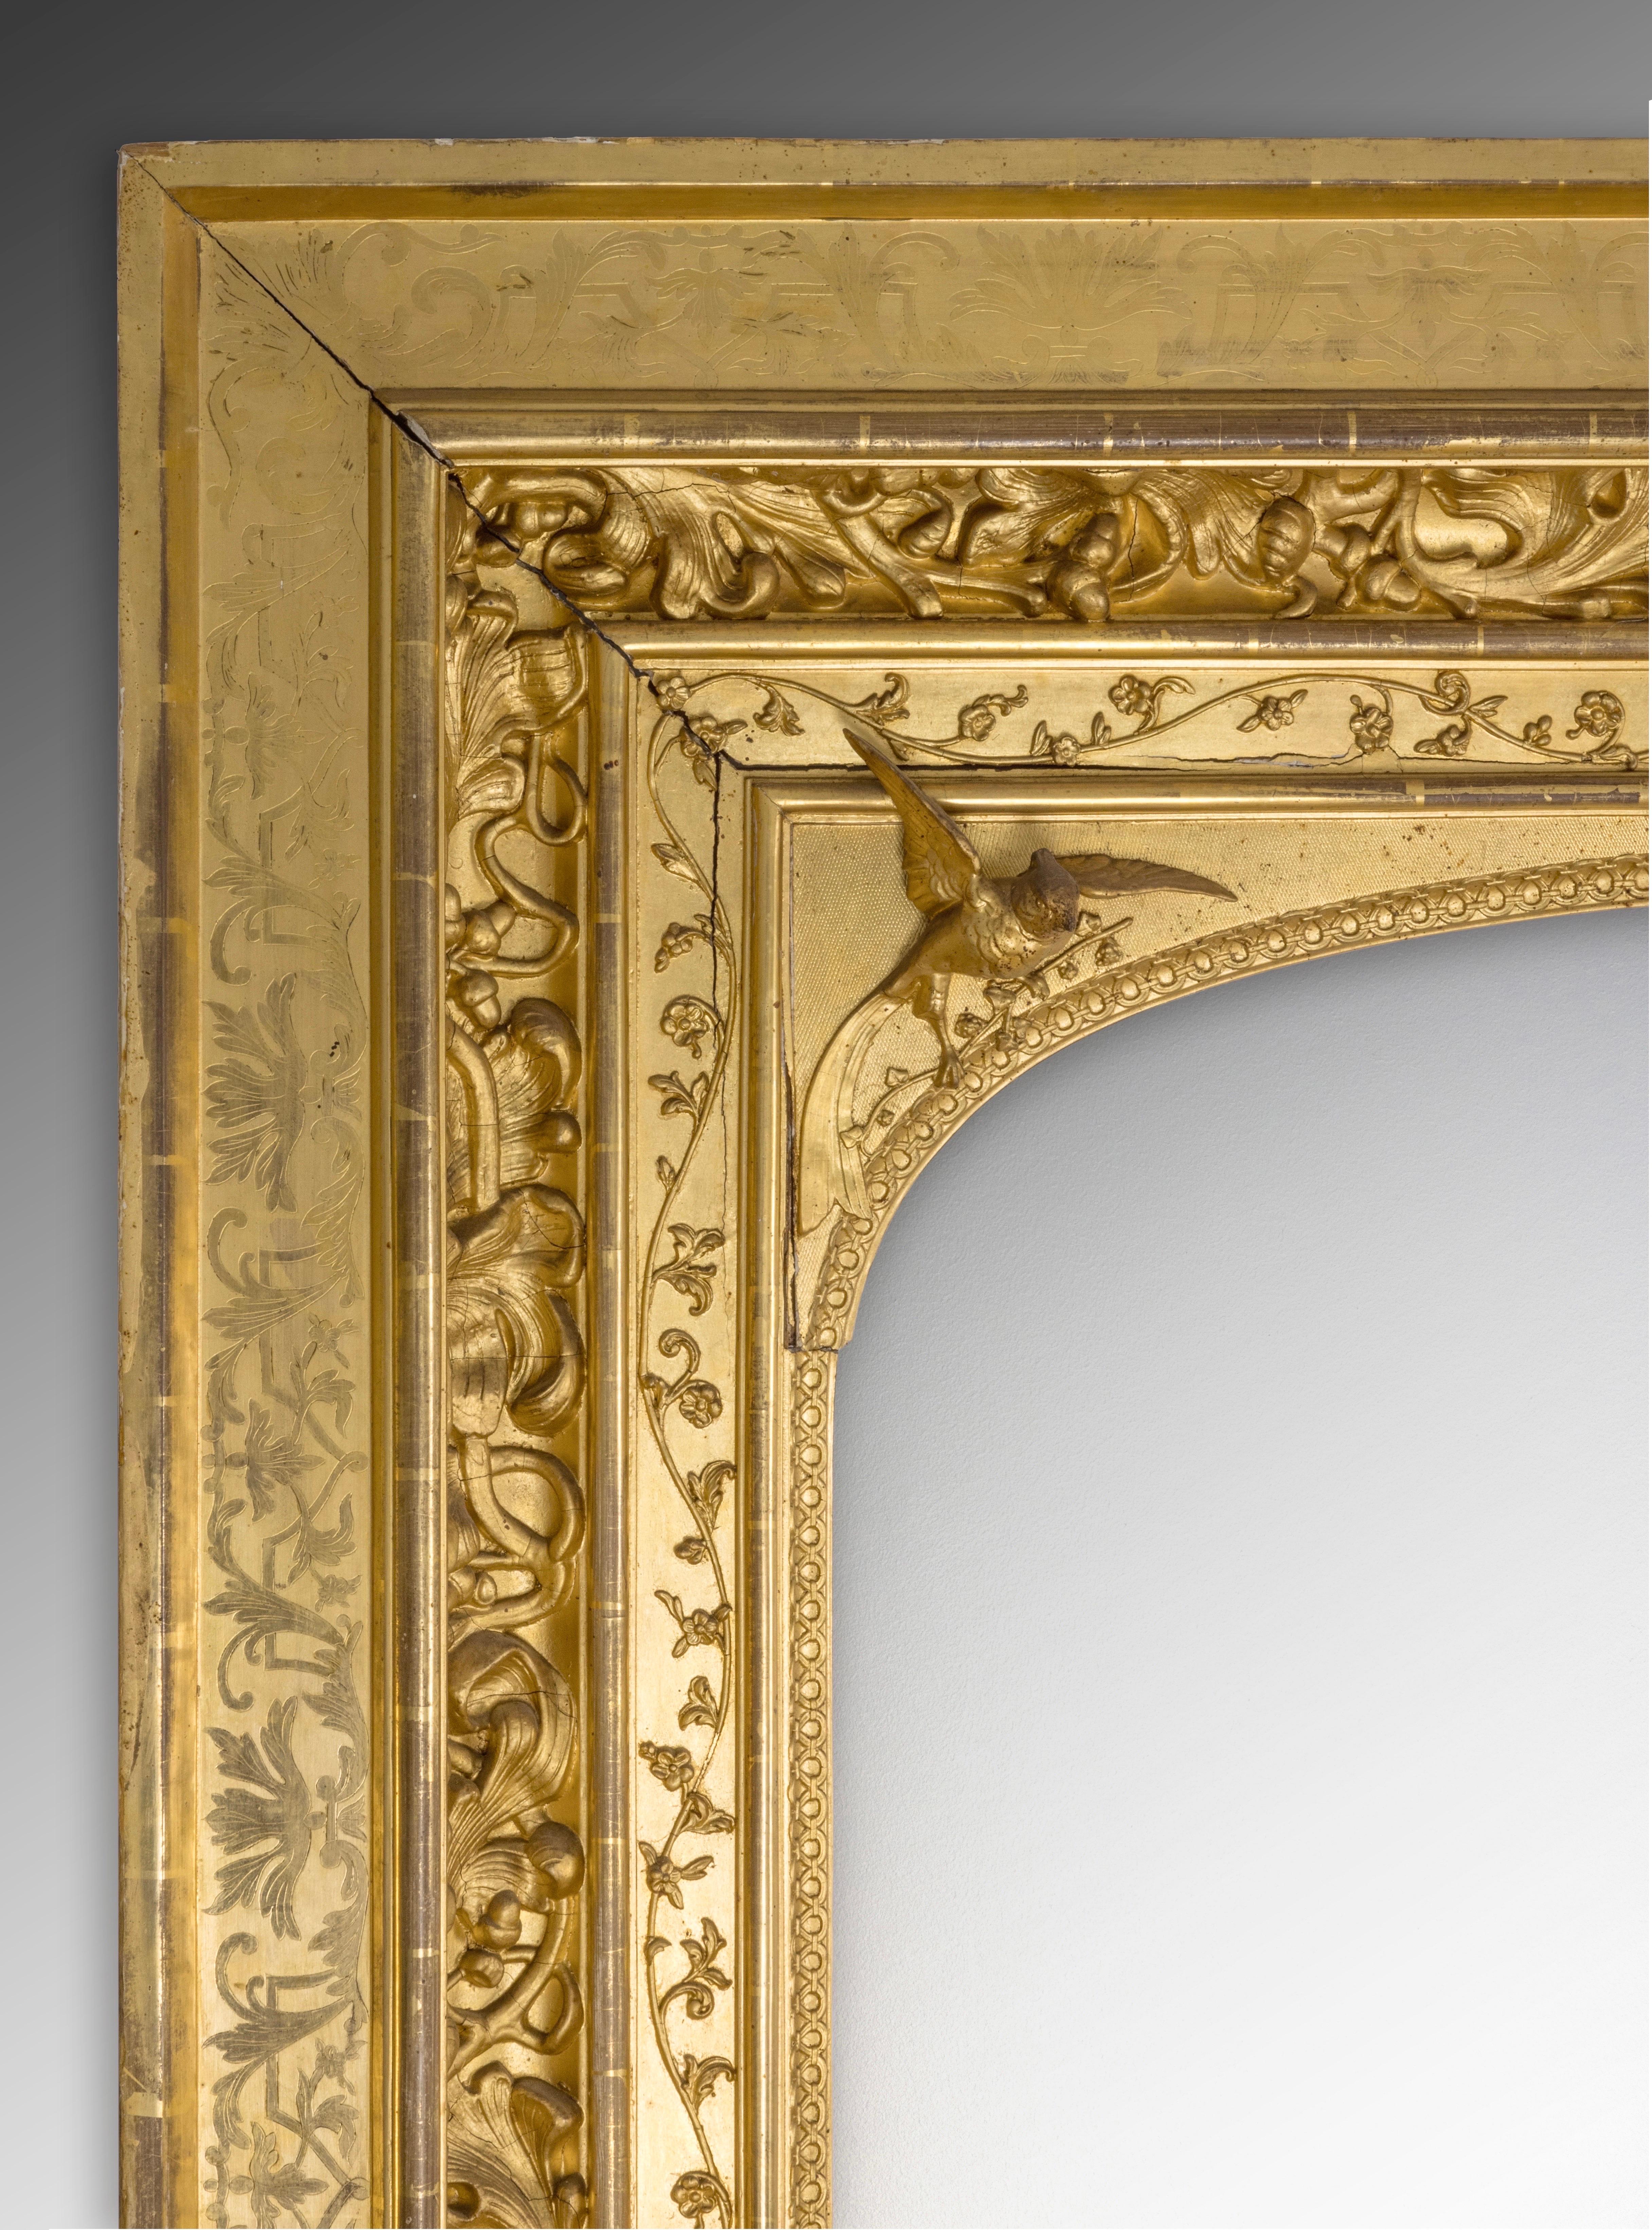 Very large Renaissance revival frame, wood and stucco gilded, second quarter of the 19th century, circa 1835, French « Troubadour » style.

Two etiquettes at back indicate that he framed a painting by Jan van Dael from 1810, sold at Christie’s Paris